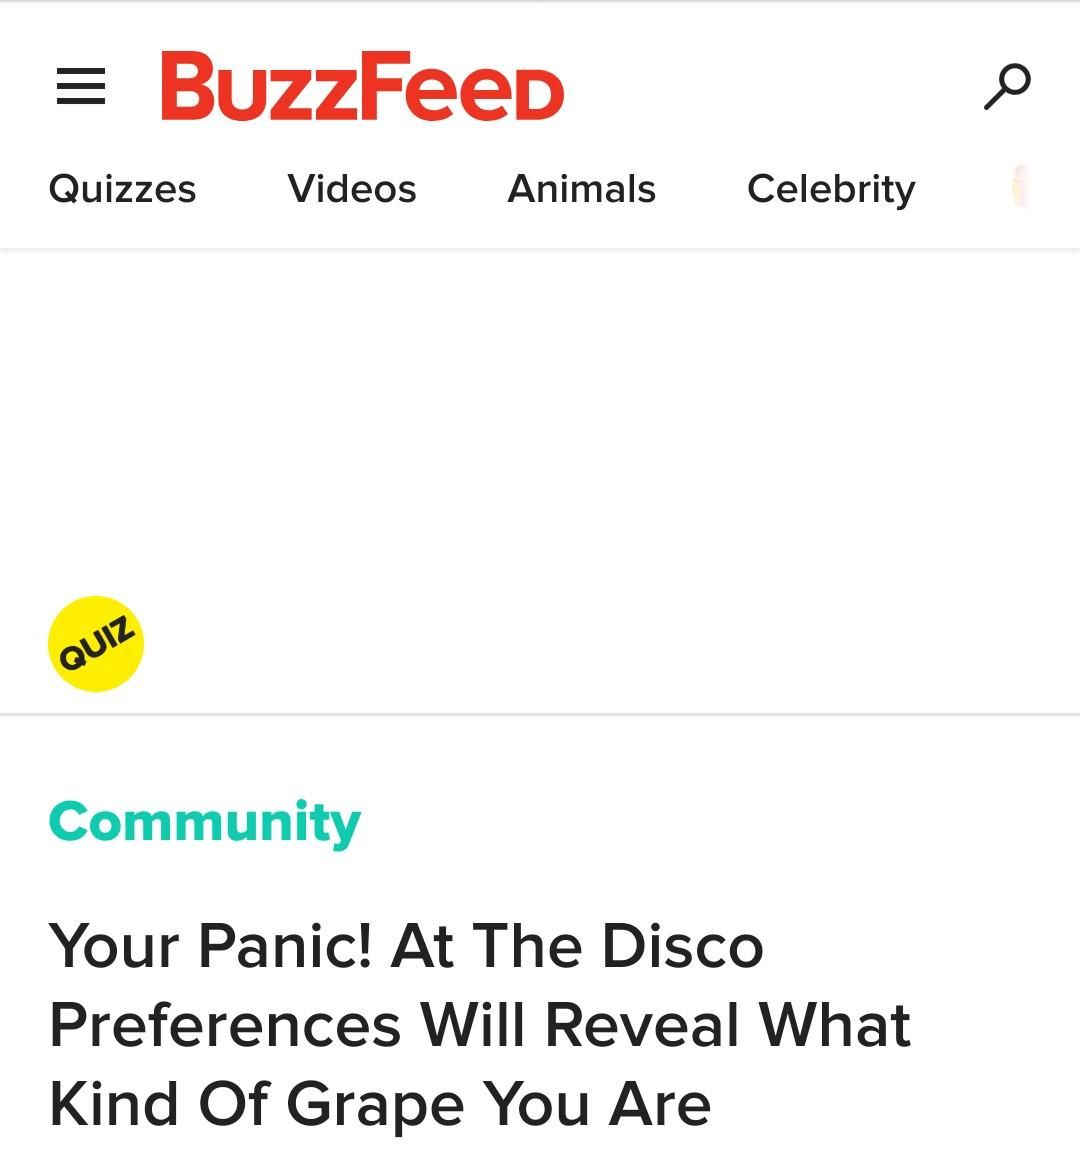 Buzzfeed has reached its peak